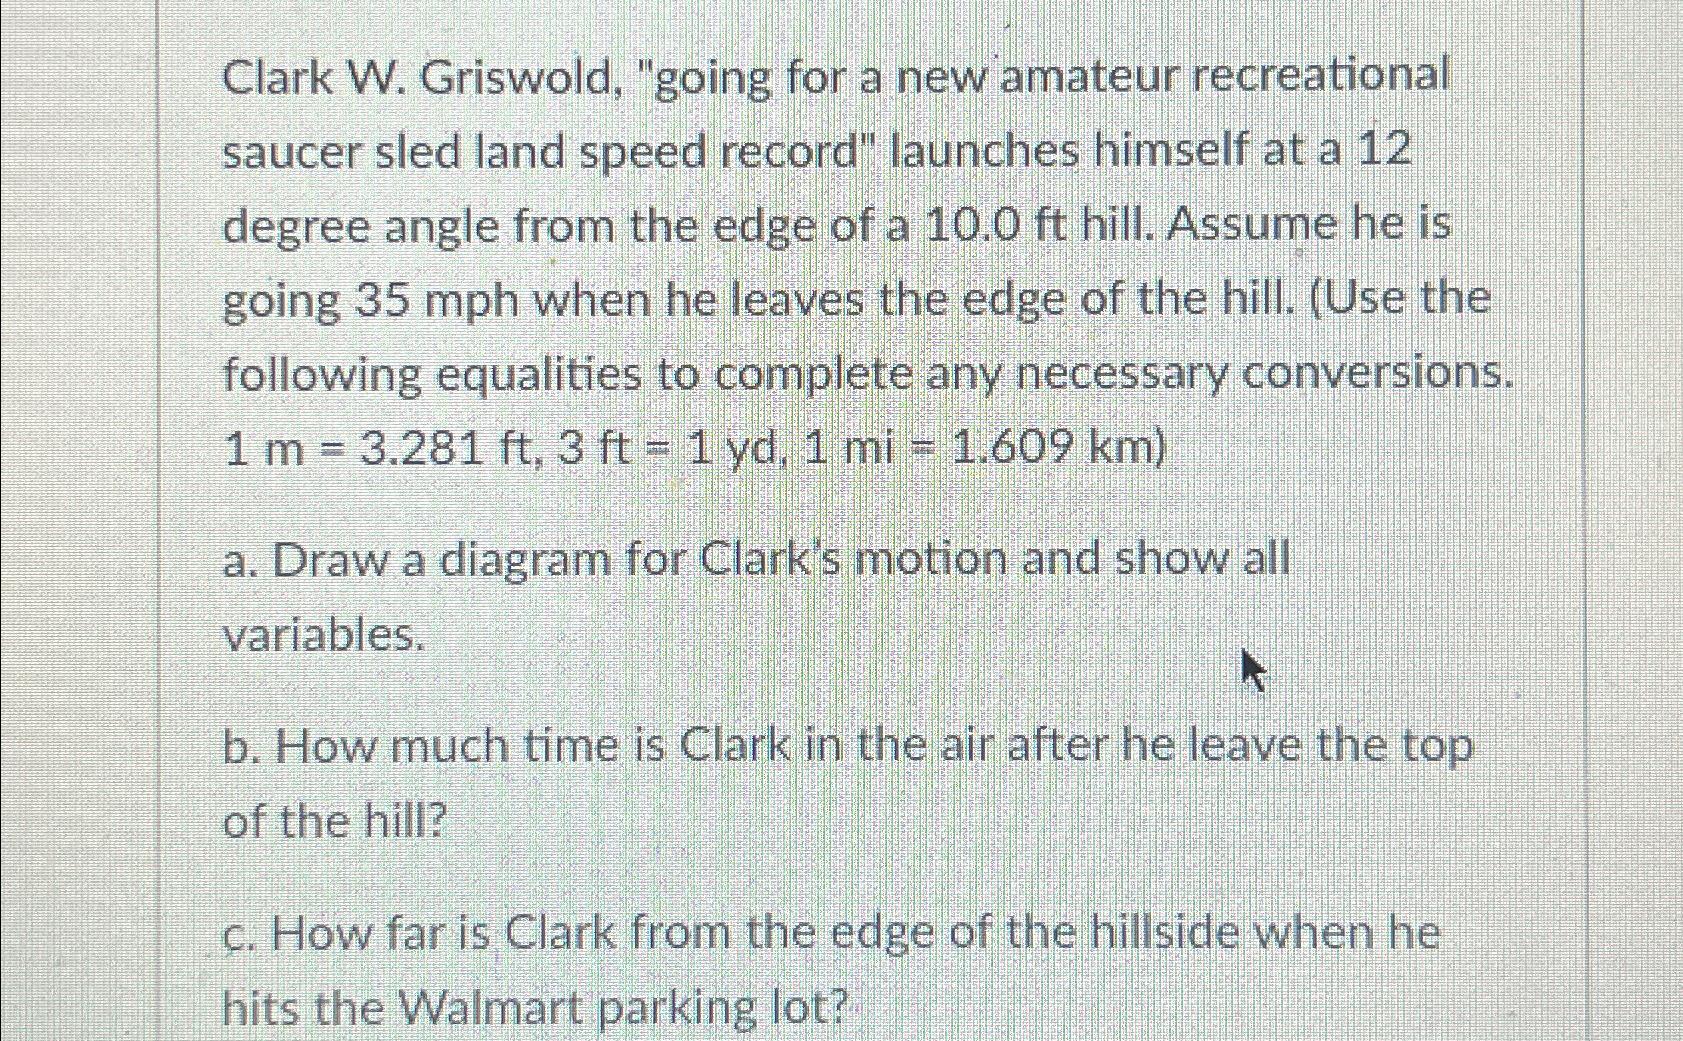 Clark W. Griswold, "going for a new amateur recreational saucer sled land speed record" launches himself at a